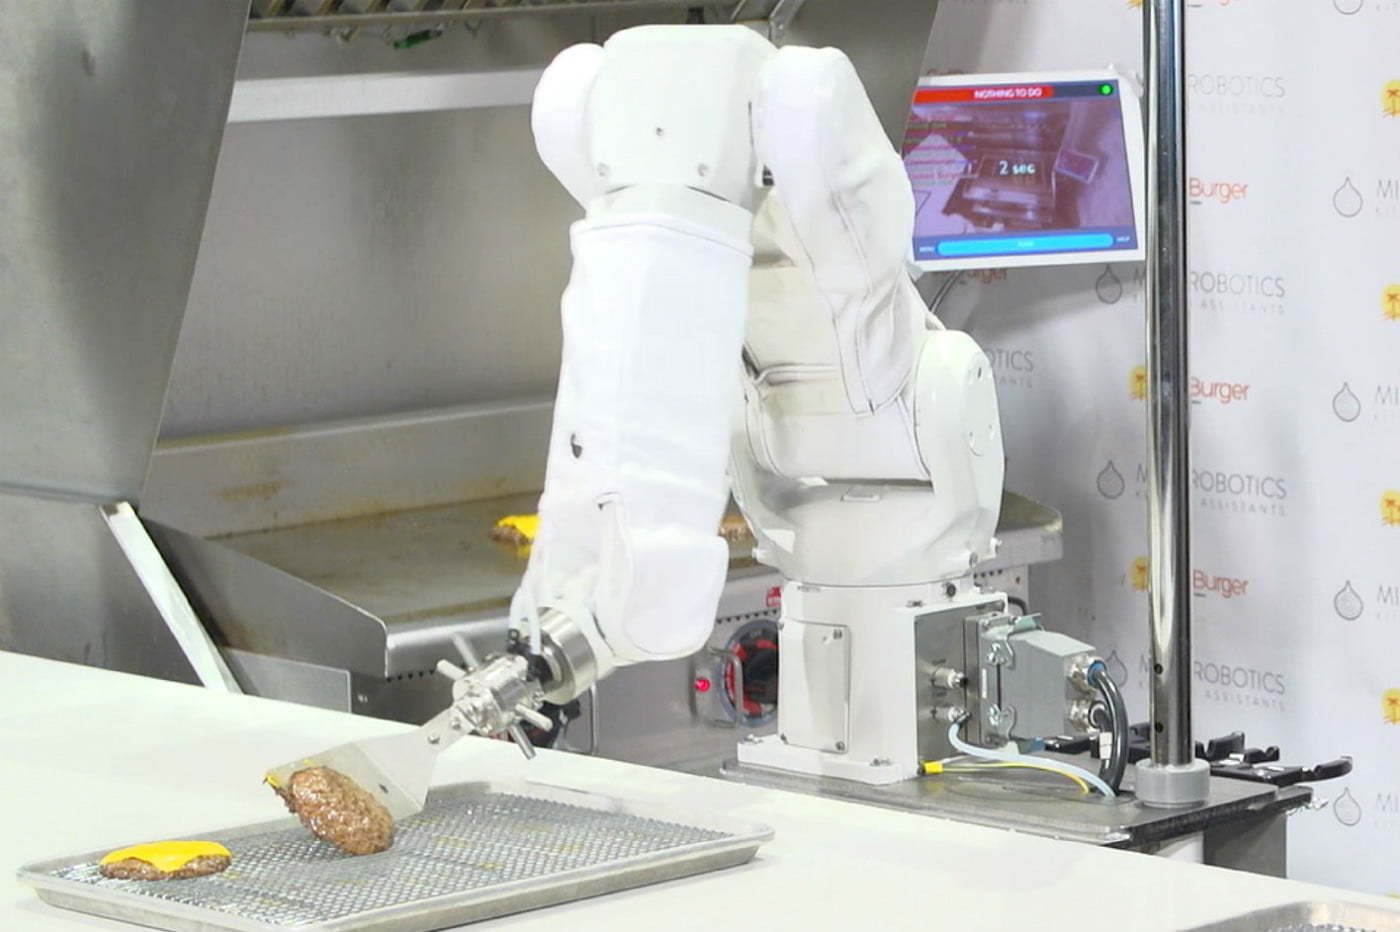 Flippy the Robot Fry Cook Moves Us Closer to Modern Feudalism - The